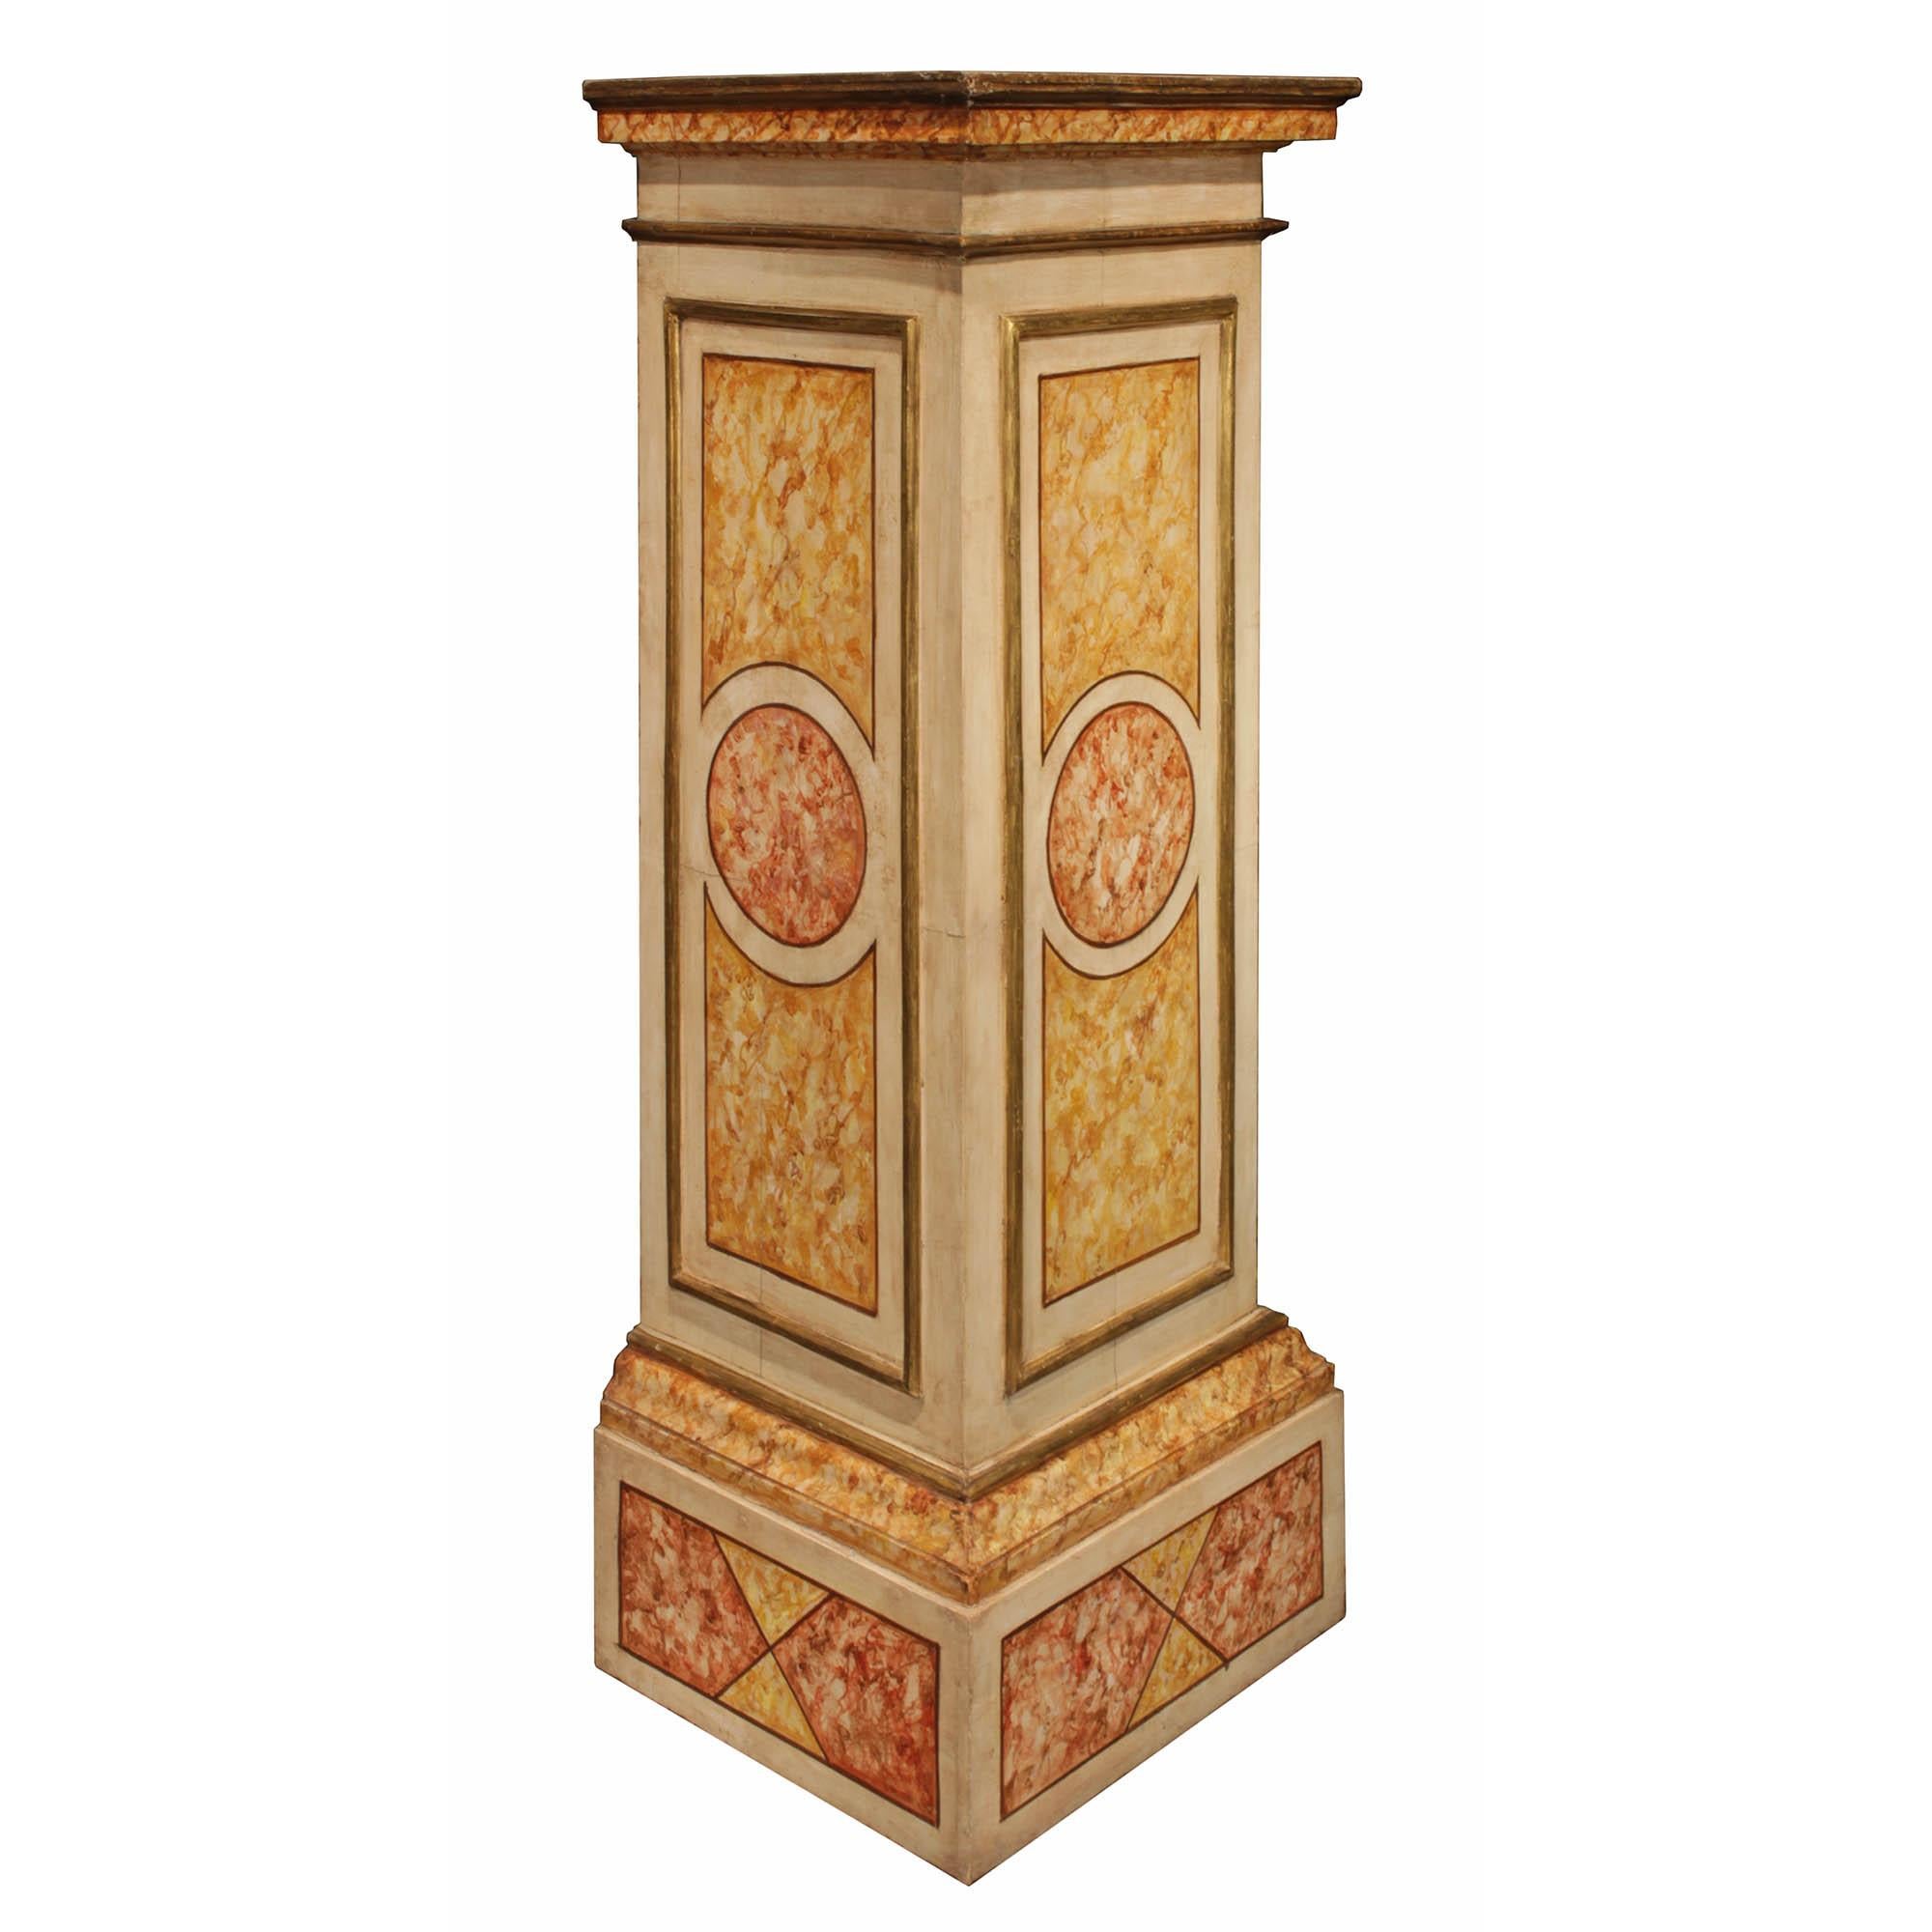 A pair of very attractive Italian 18th century mecca and polychrome pedestals. The pedestals have a faux marble painted finish throughout. Each pedestal is raised on a mottled top square base. At the column above is an 